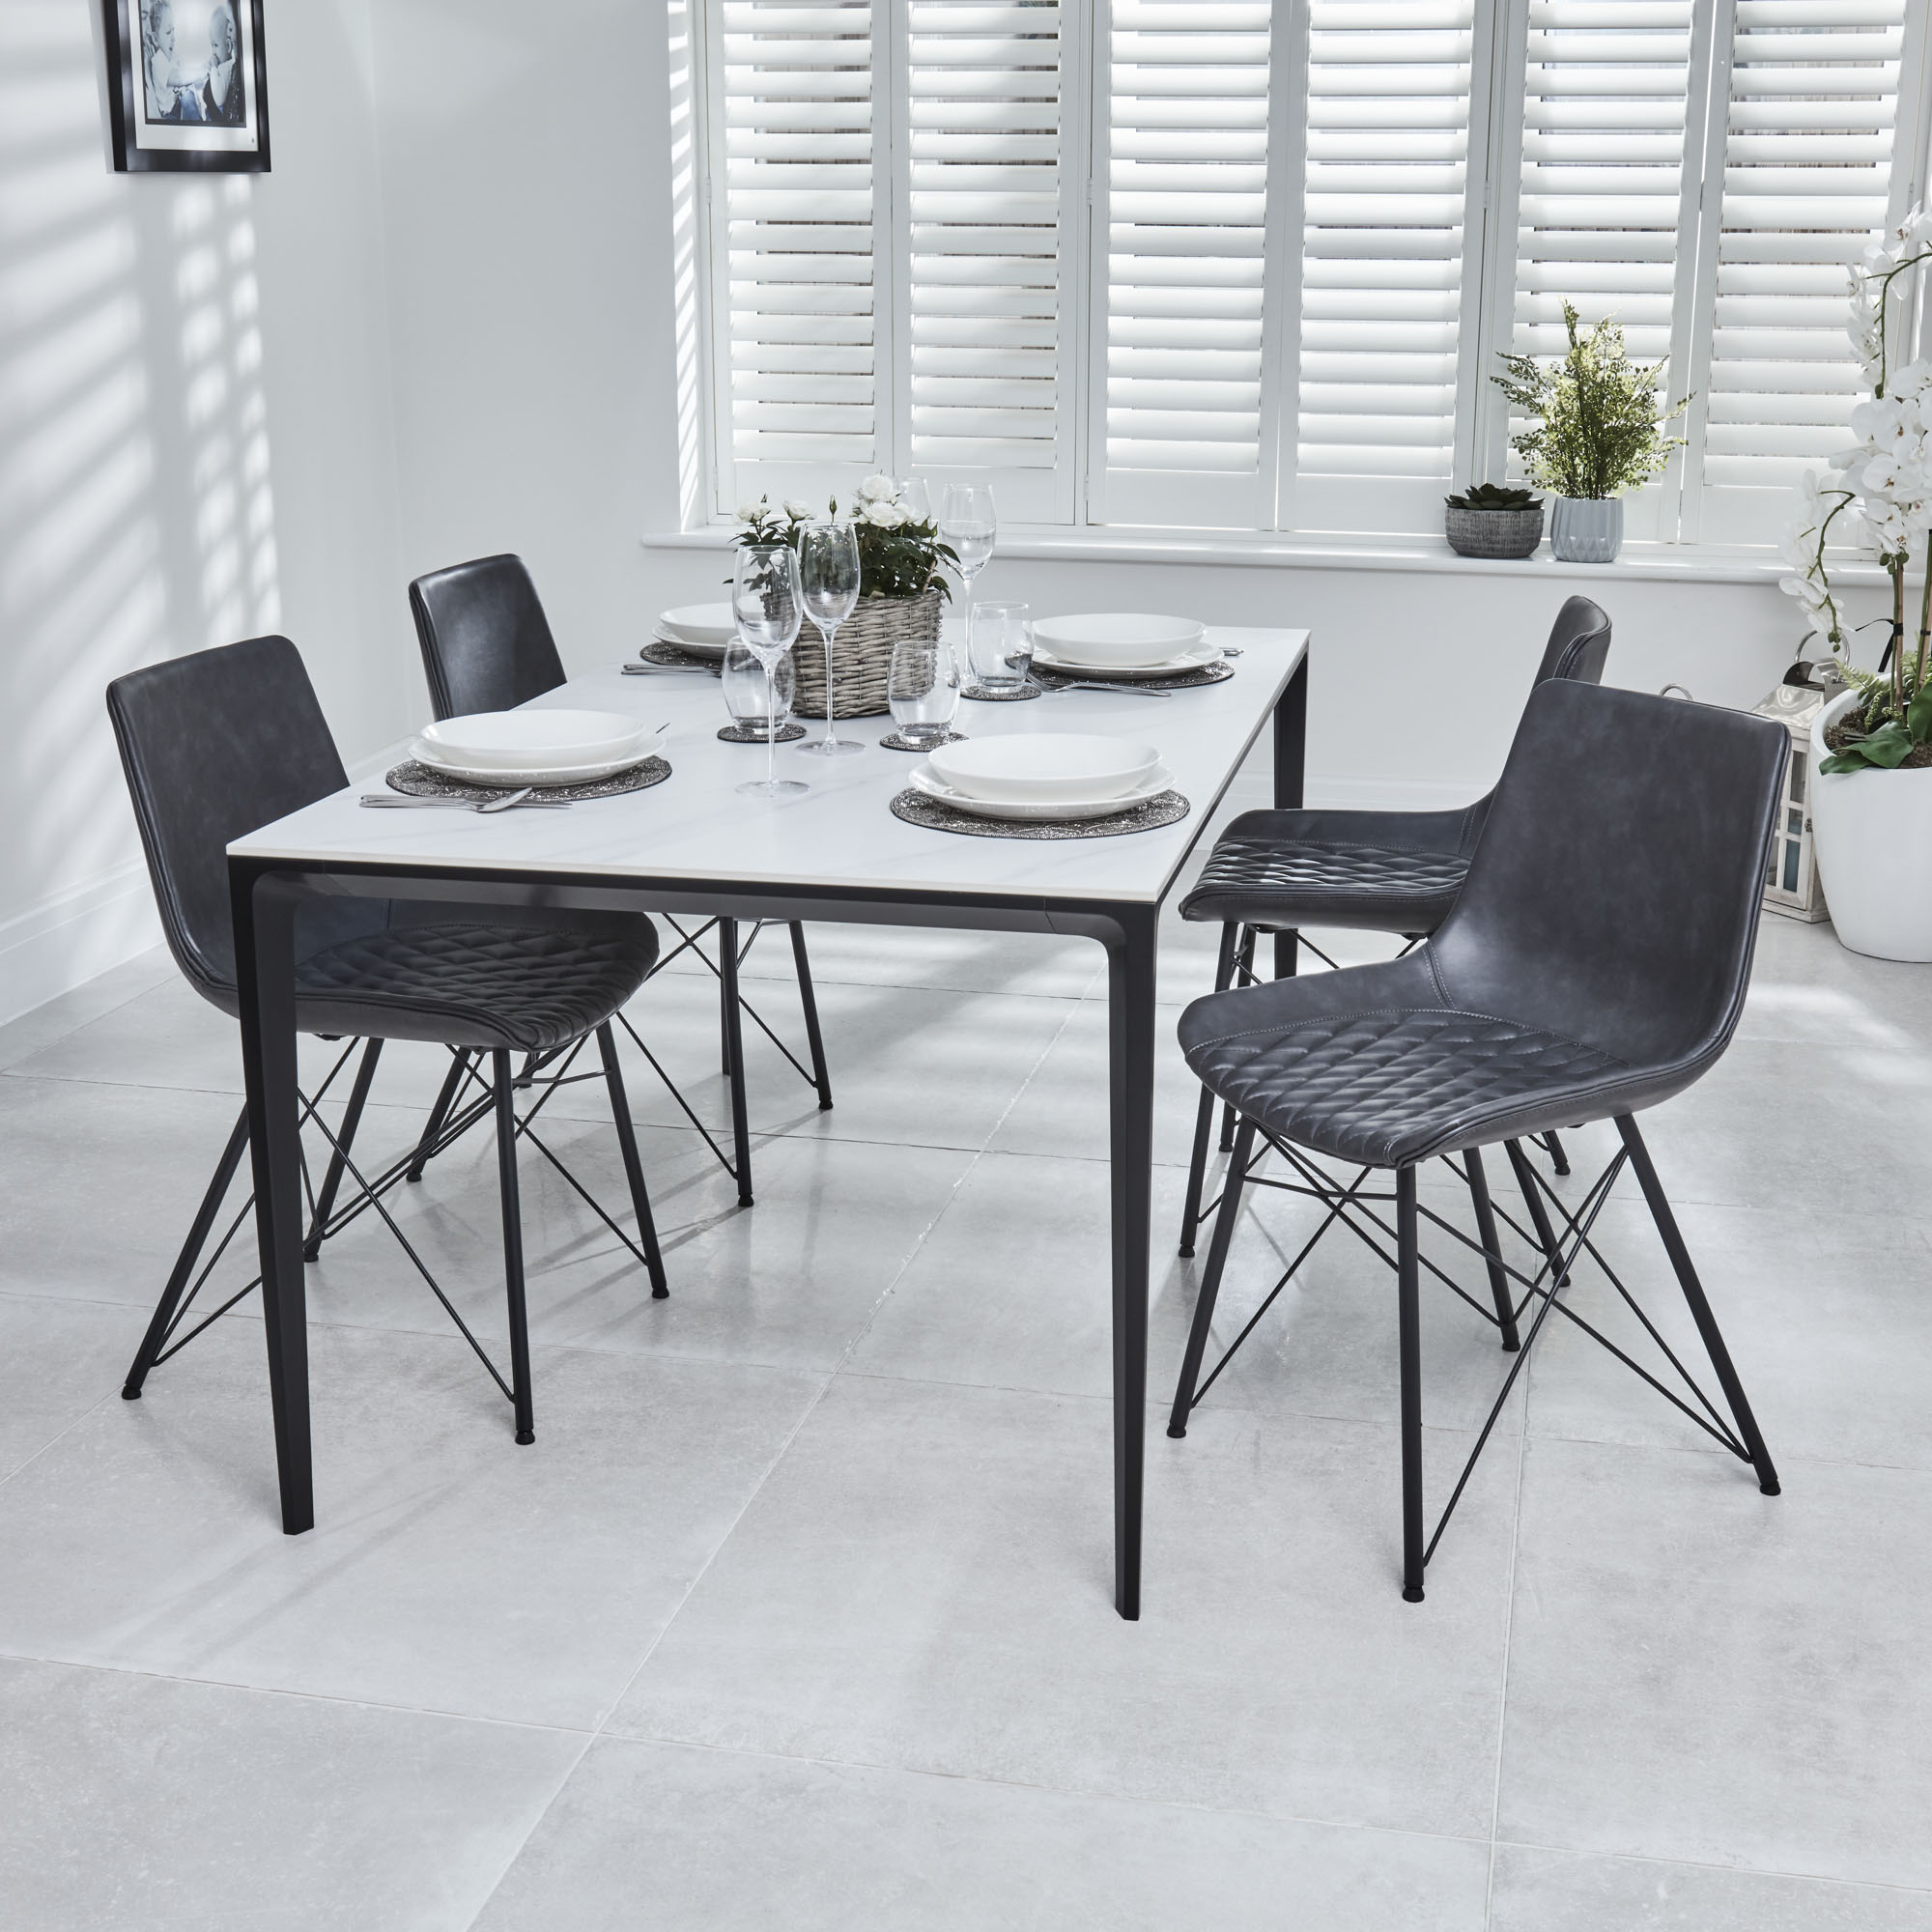 Bellagio 1.6M White Sintered Stone Dining Table Set with 4x Leon Grey Dining Chairs